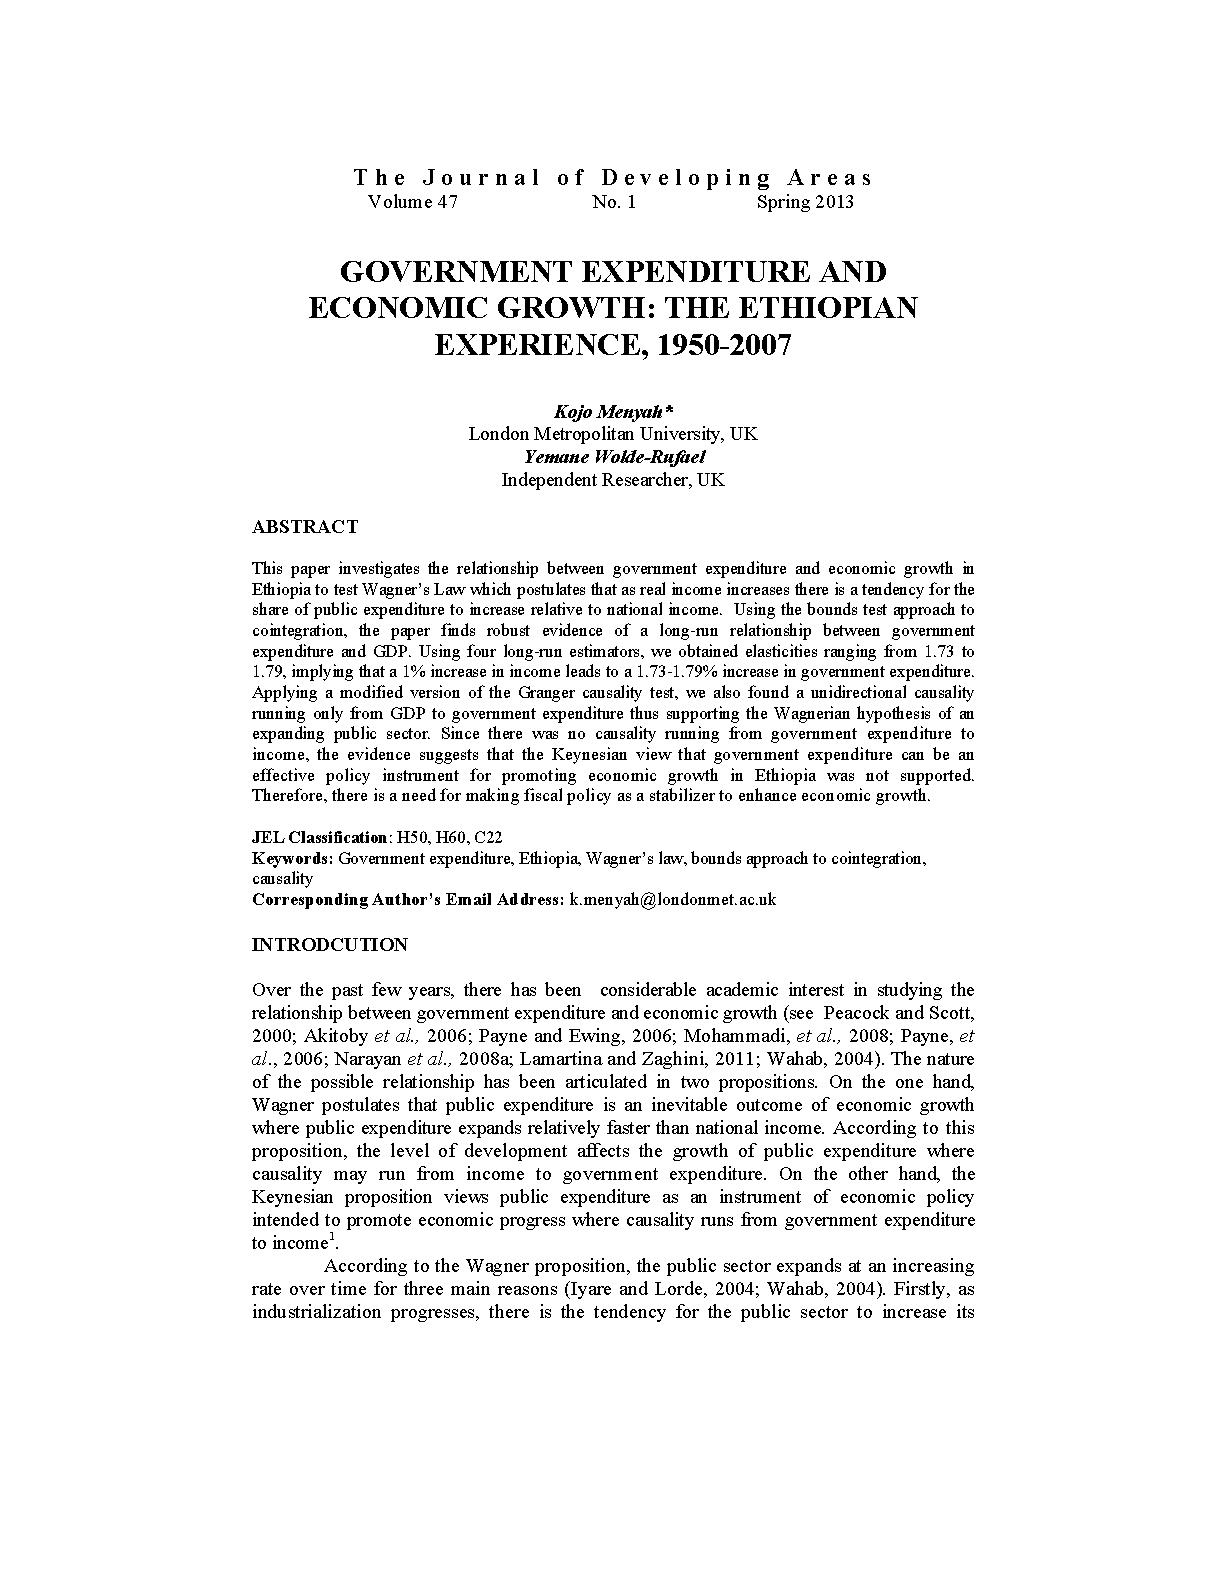 government expenditure and economic growth pdf